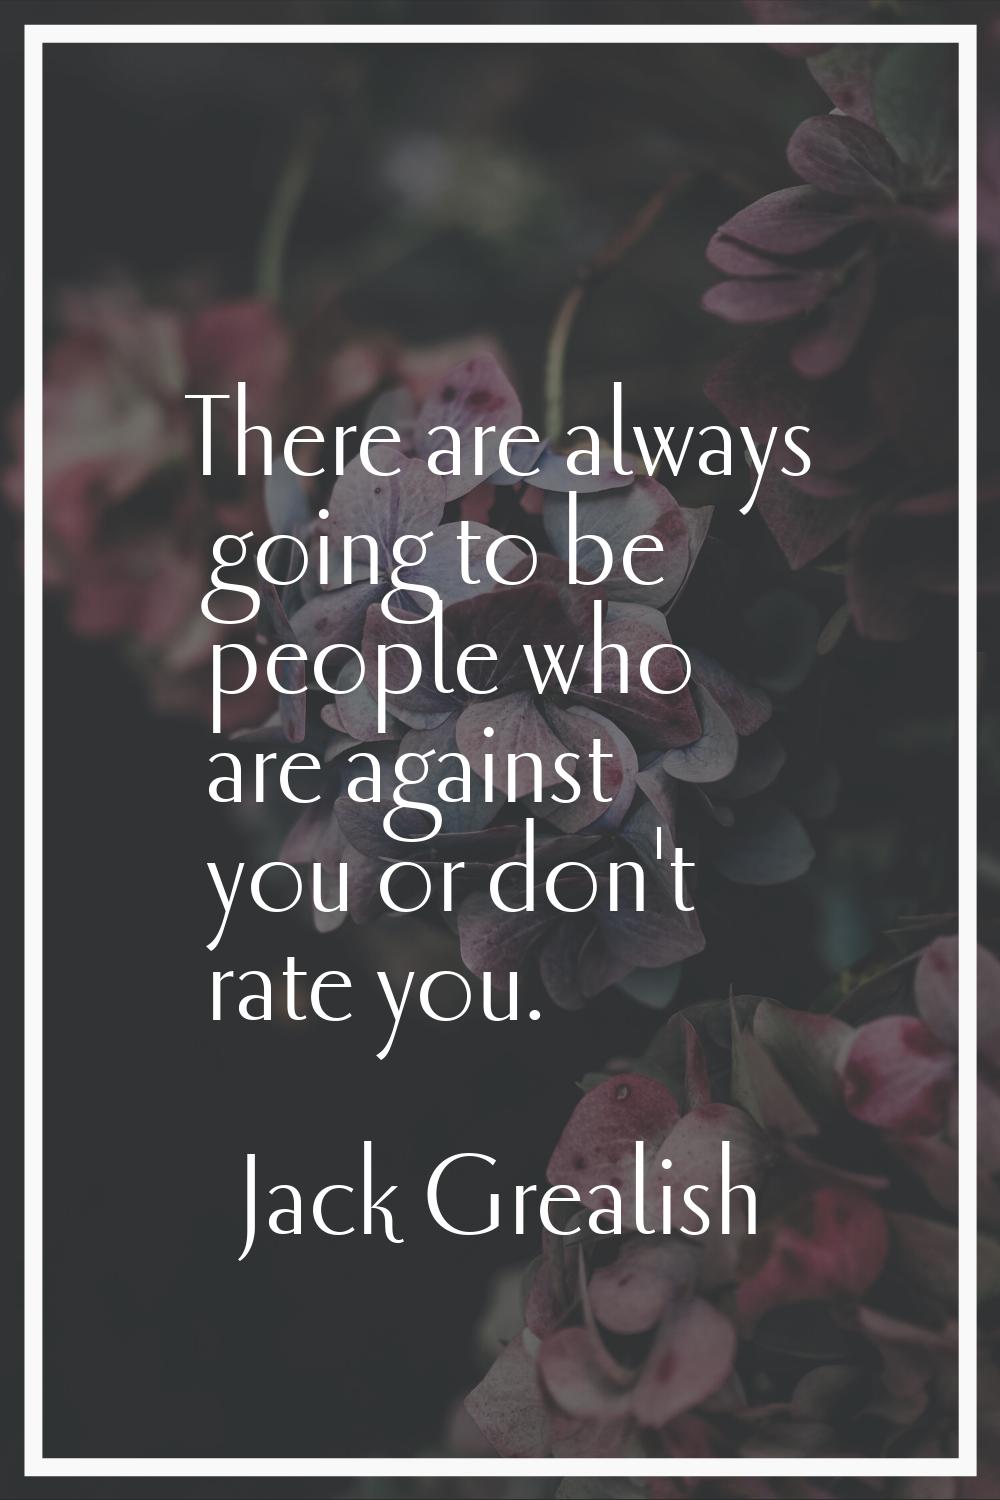 There are always going to be people who are against you or don't rate you.